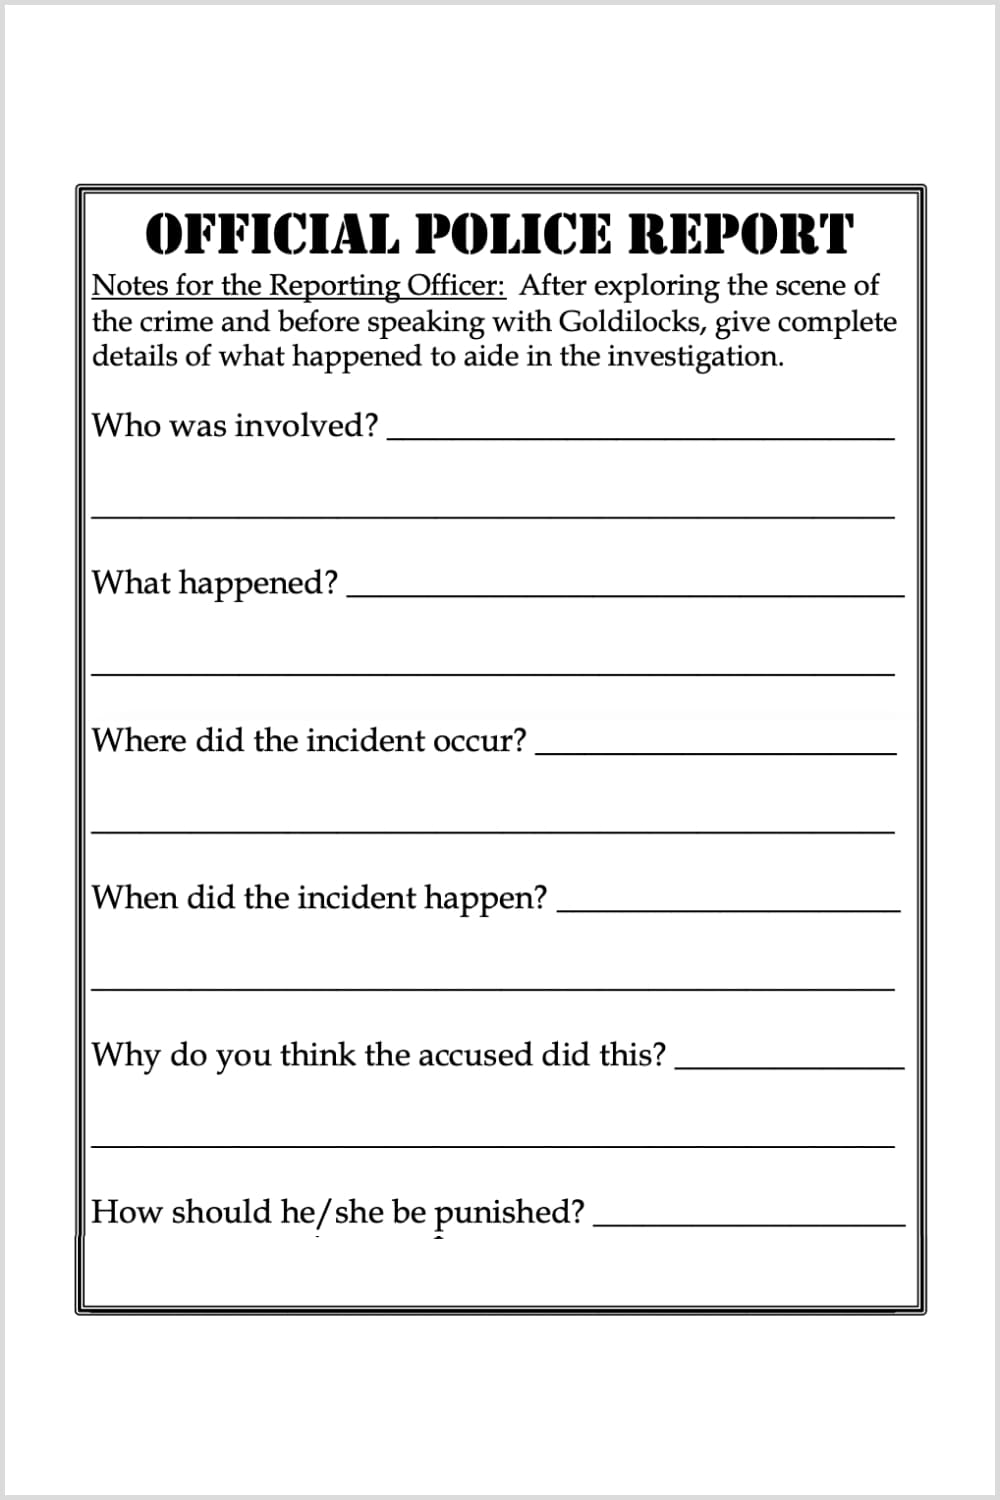 Image of an official police report with questions and space for answers.